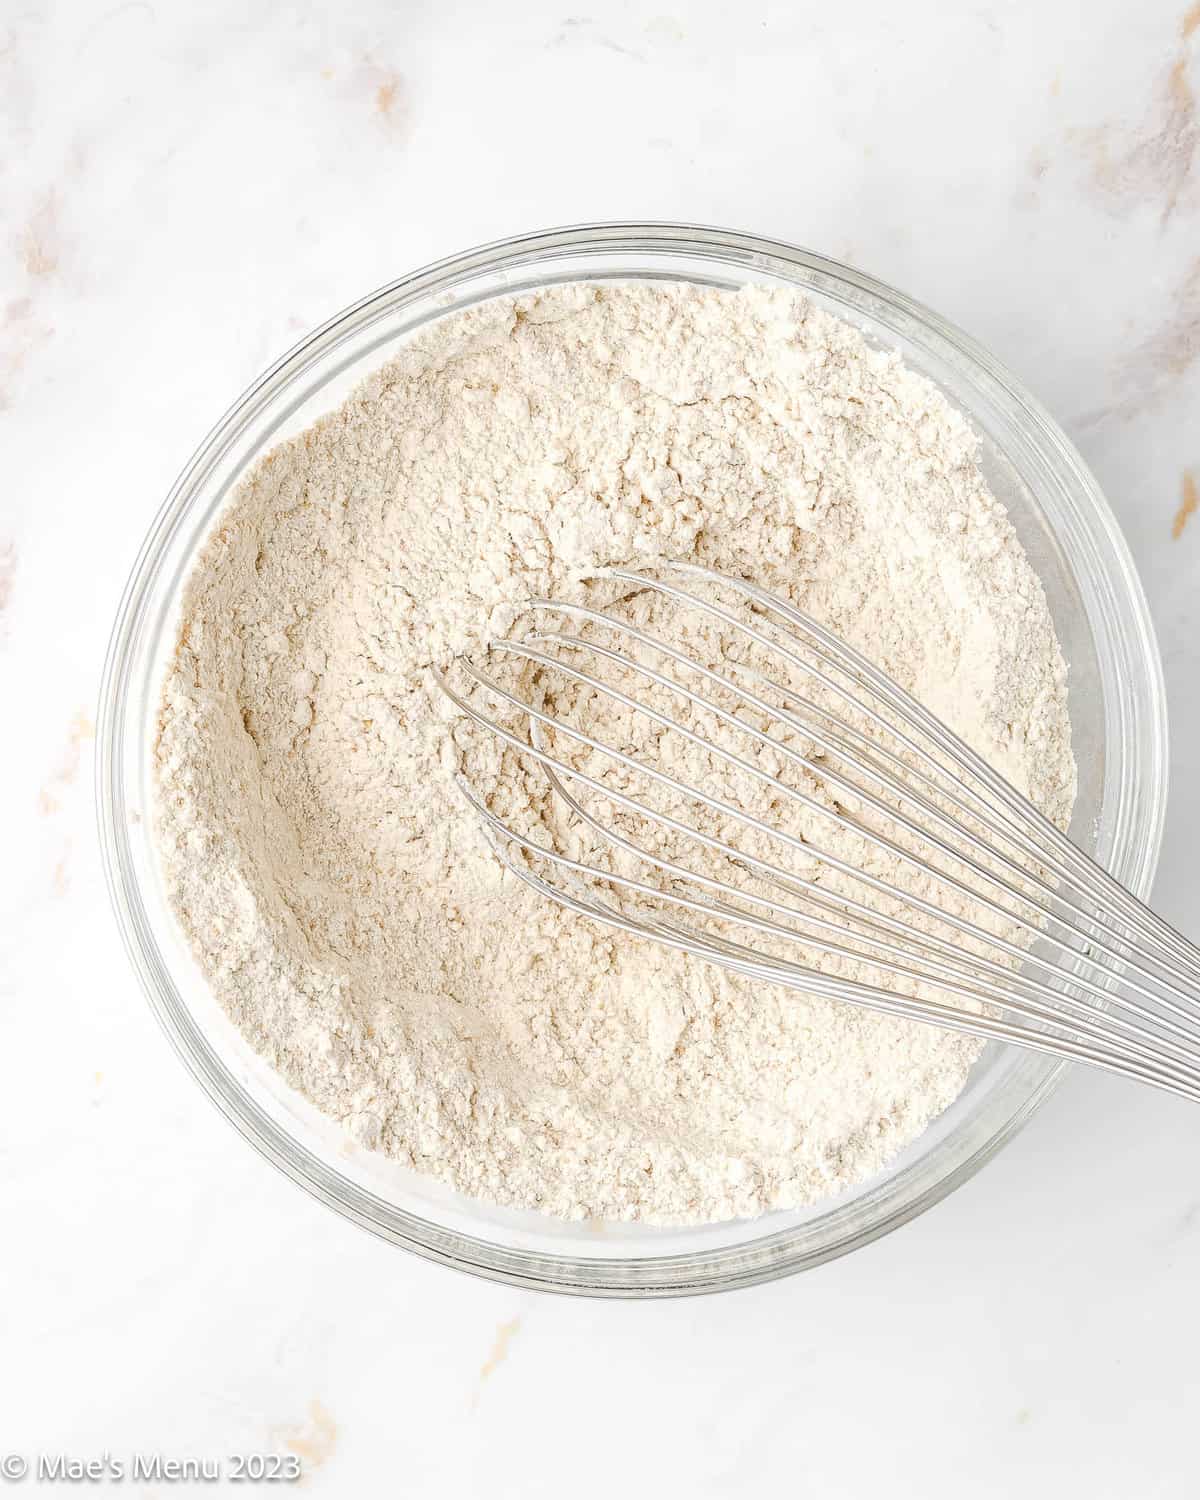 Whisking the flour and ingredients together in a glass mixing bowl.